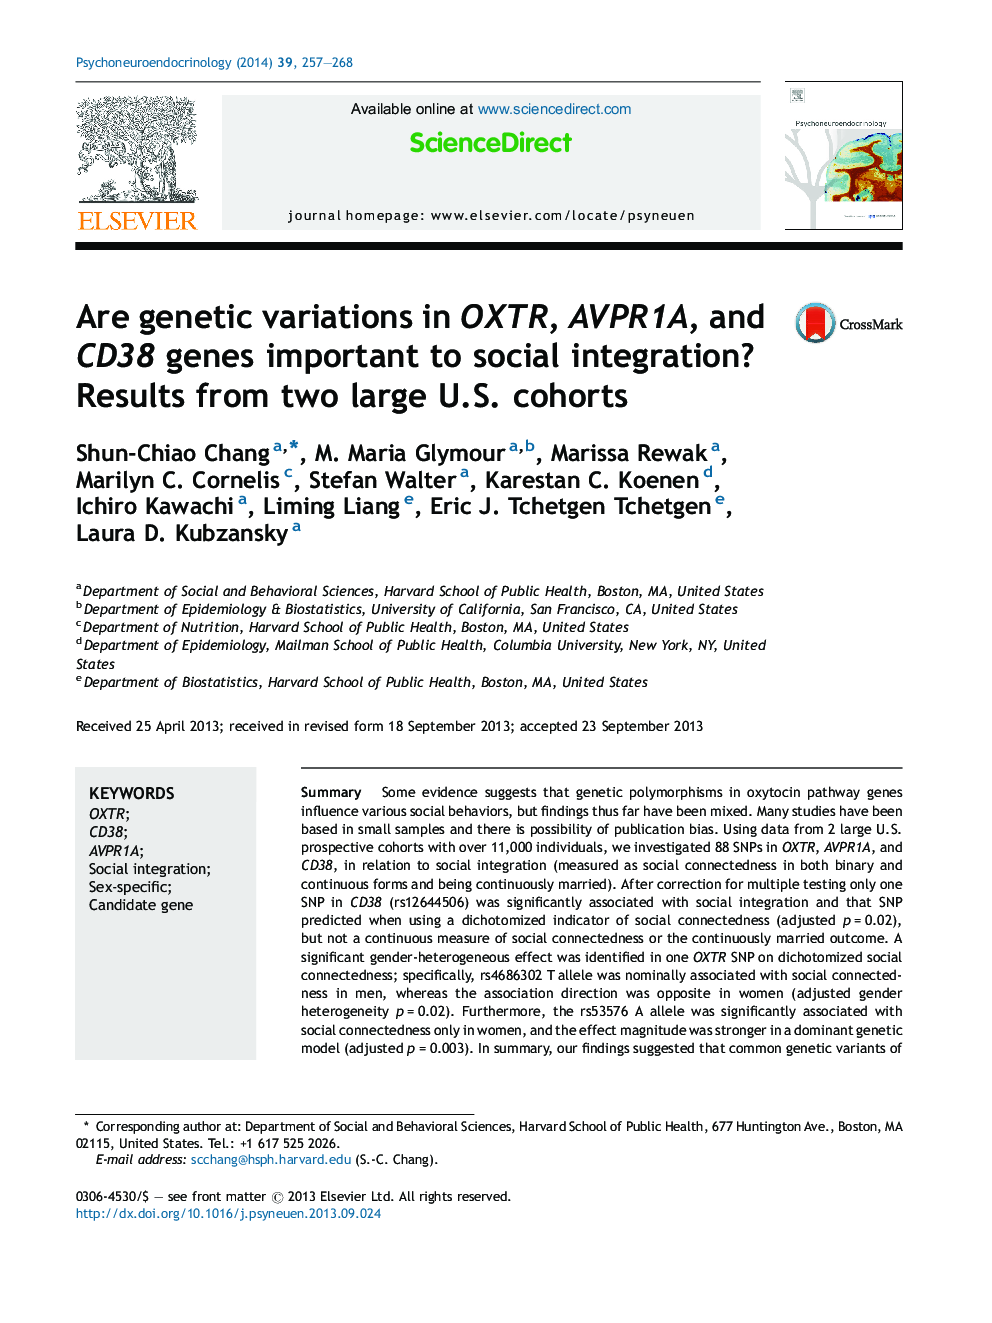 Are genetic variations in OXTR, AVPR1A, and CD38 genes important to social integration? Results from two large U.S. cohorts